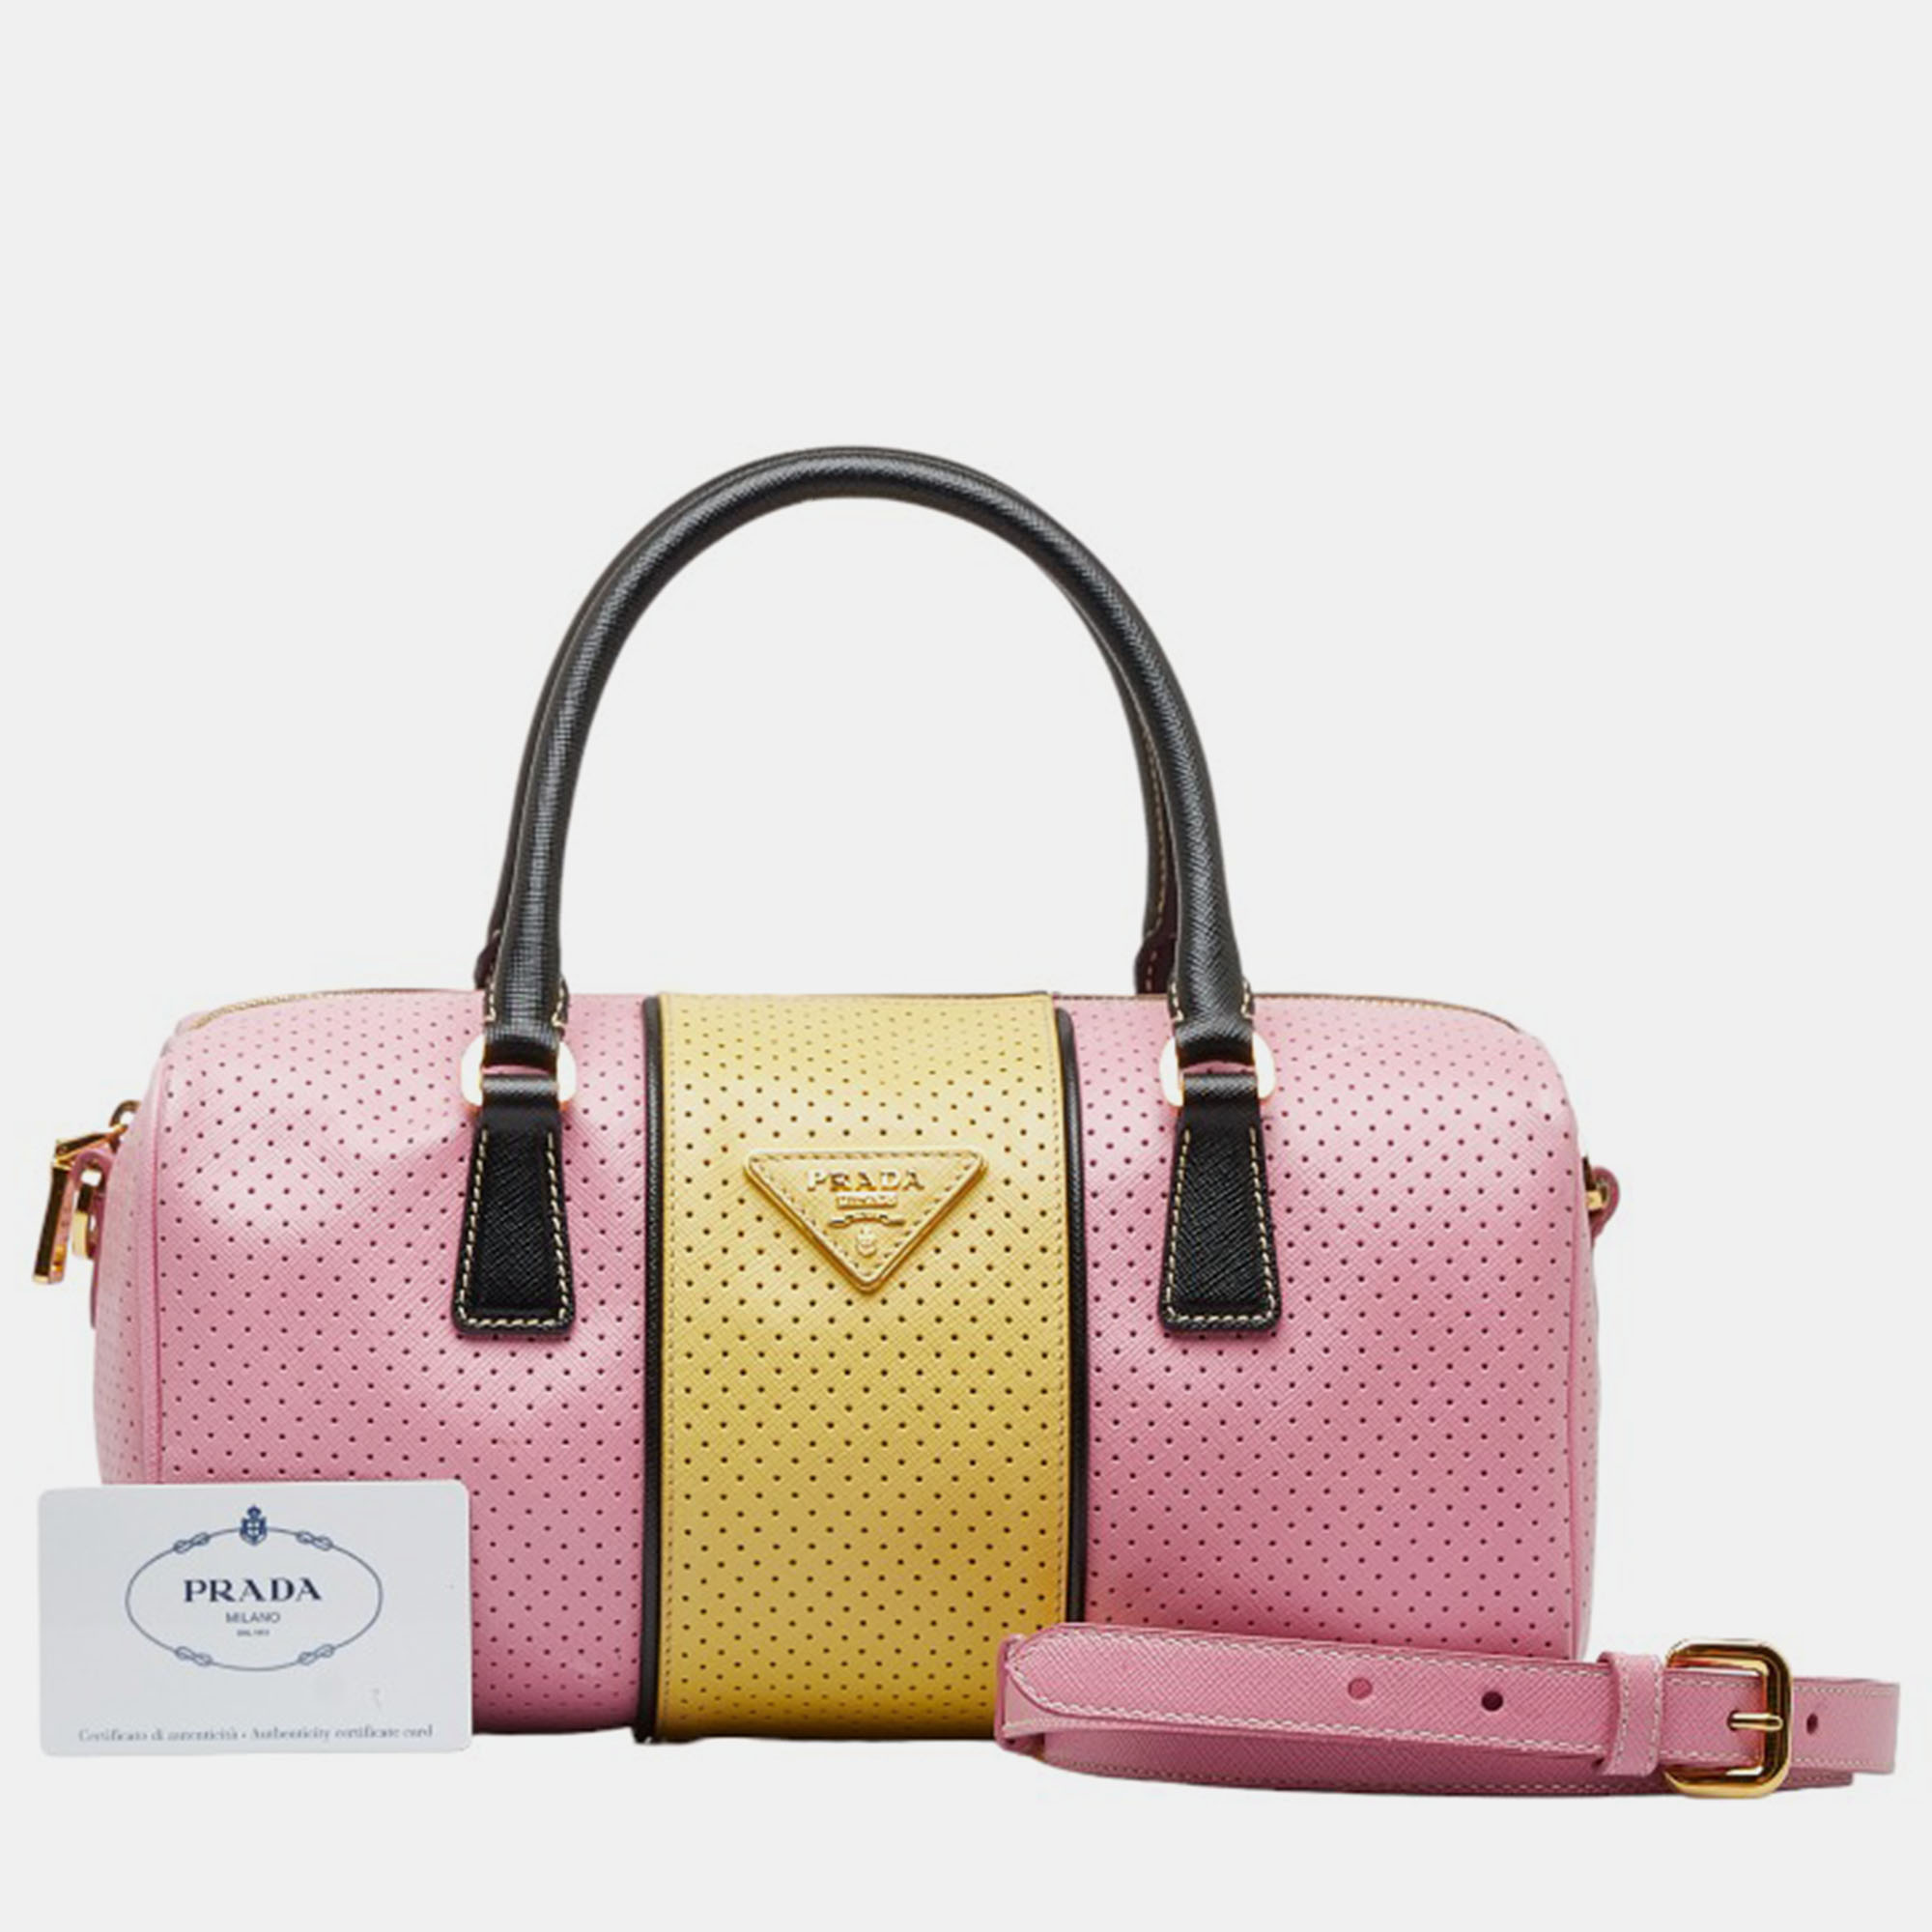 Prada Pink/Yellow Perforated Leather Lux Bauletto Boston Bag